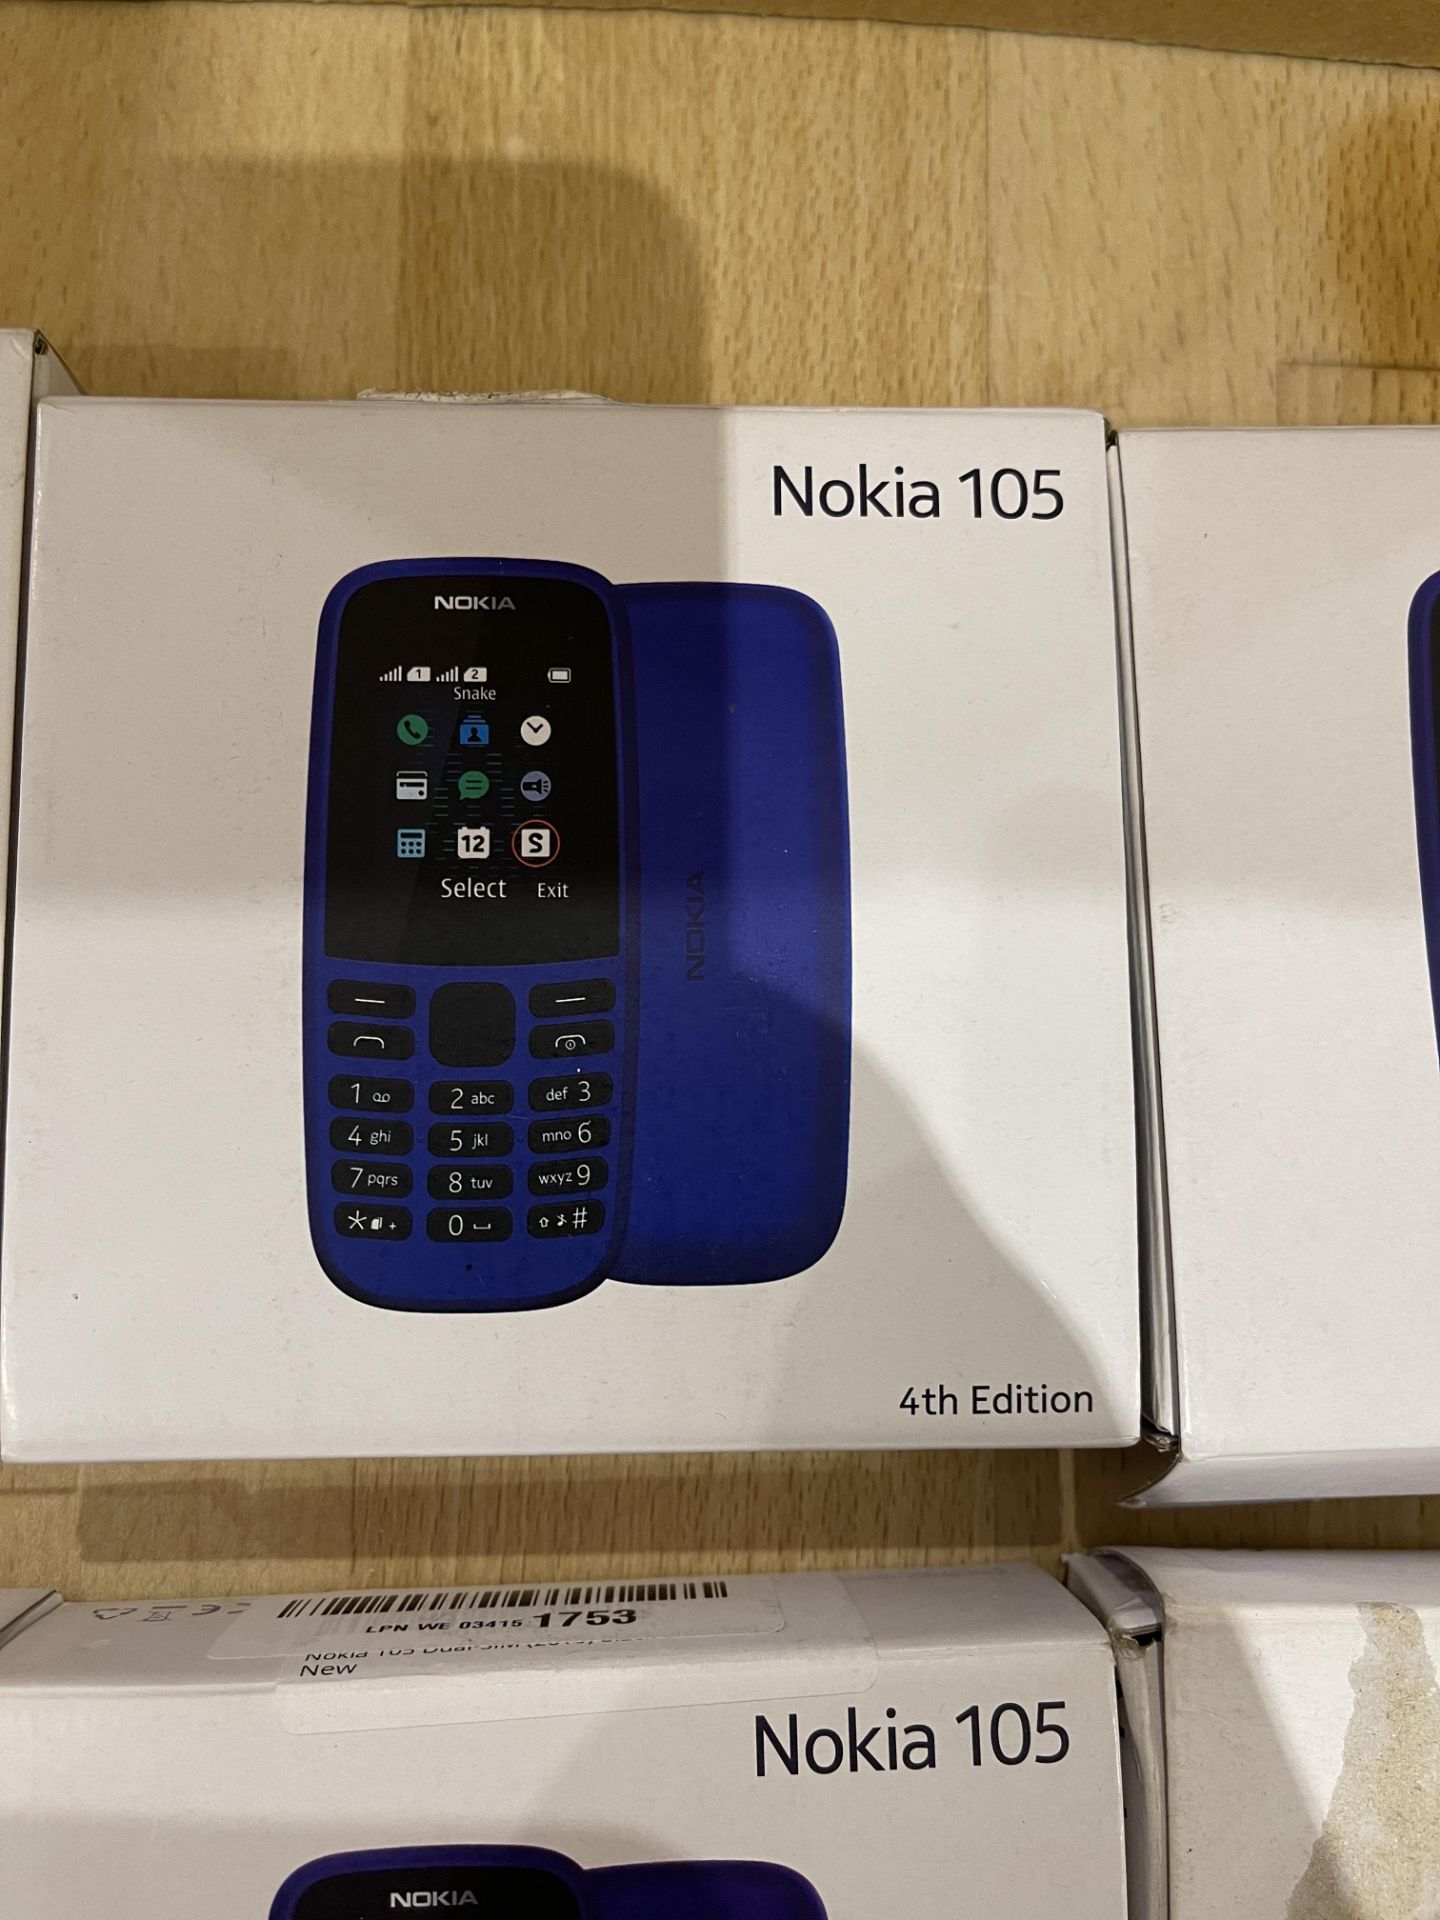 6: Nokia 105 Dual Sim Mobile Phones, Boxes Have Been Opened, Phone, Battery & Charger All Present - - Image 4 of 15